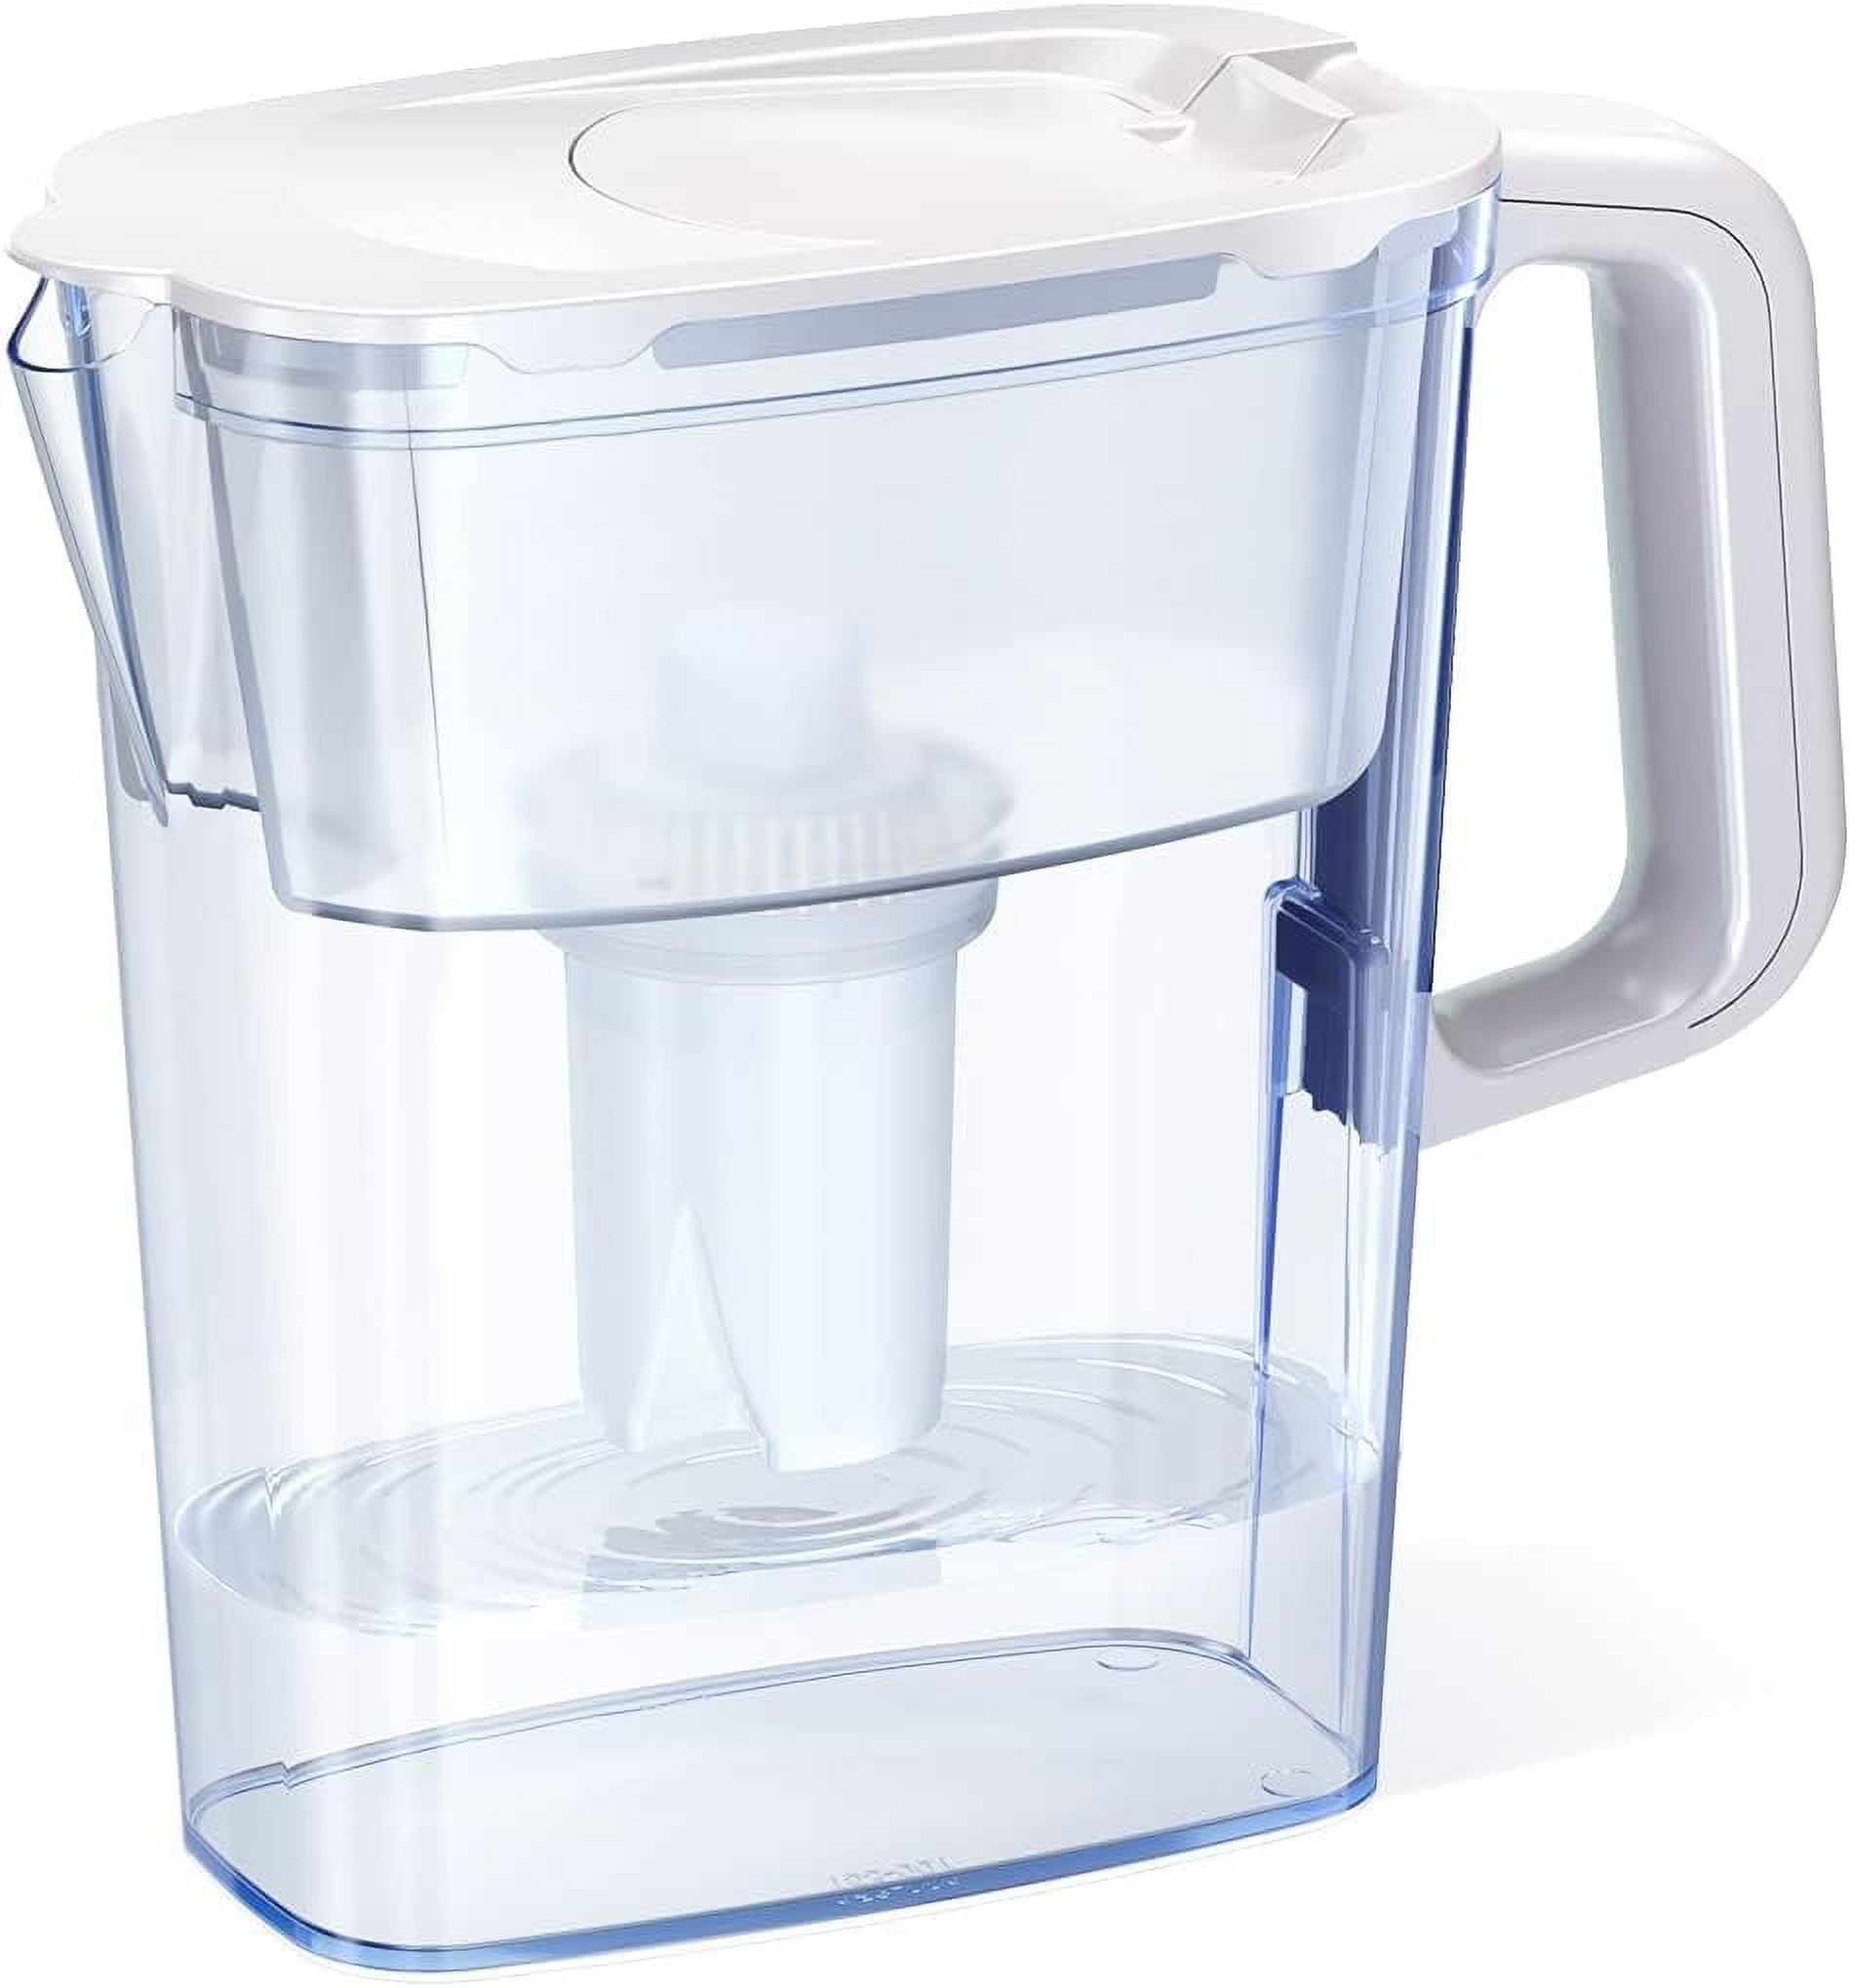 Brita Small 6-Cup Space-Saver BPA-Free Water Pitcher with Filter (35566)